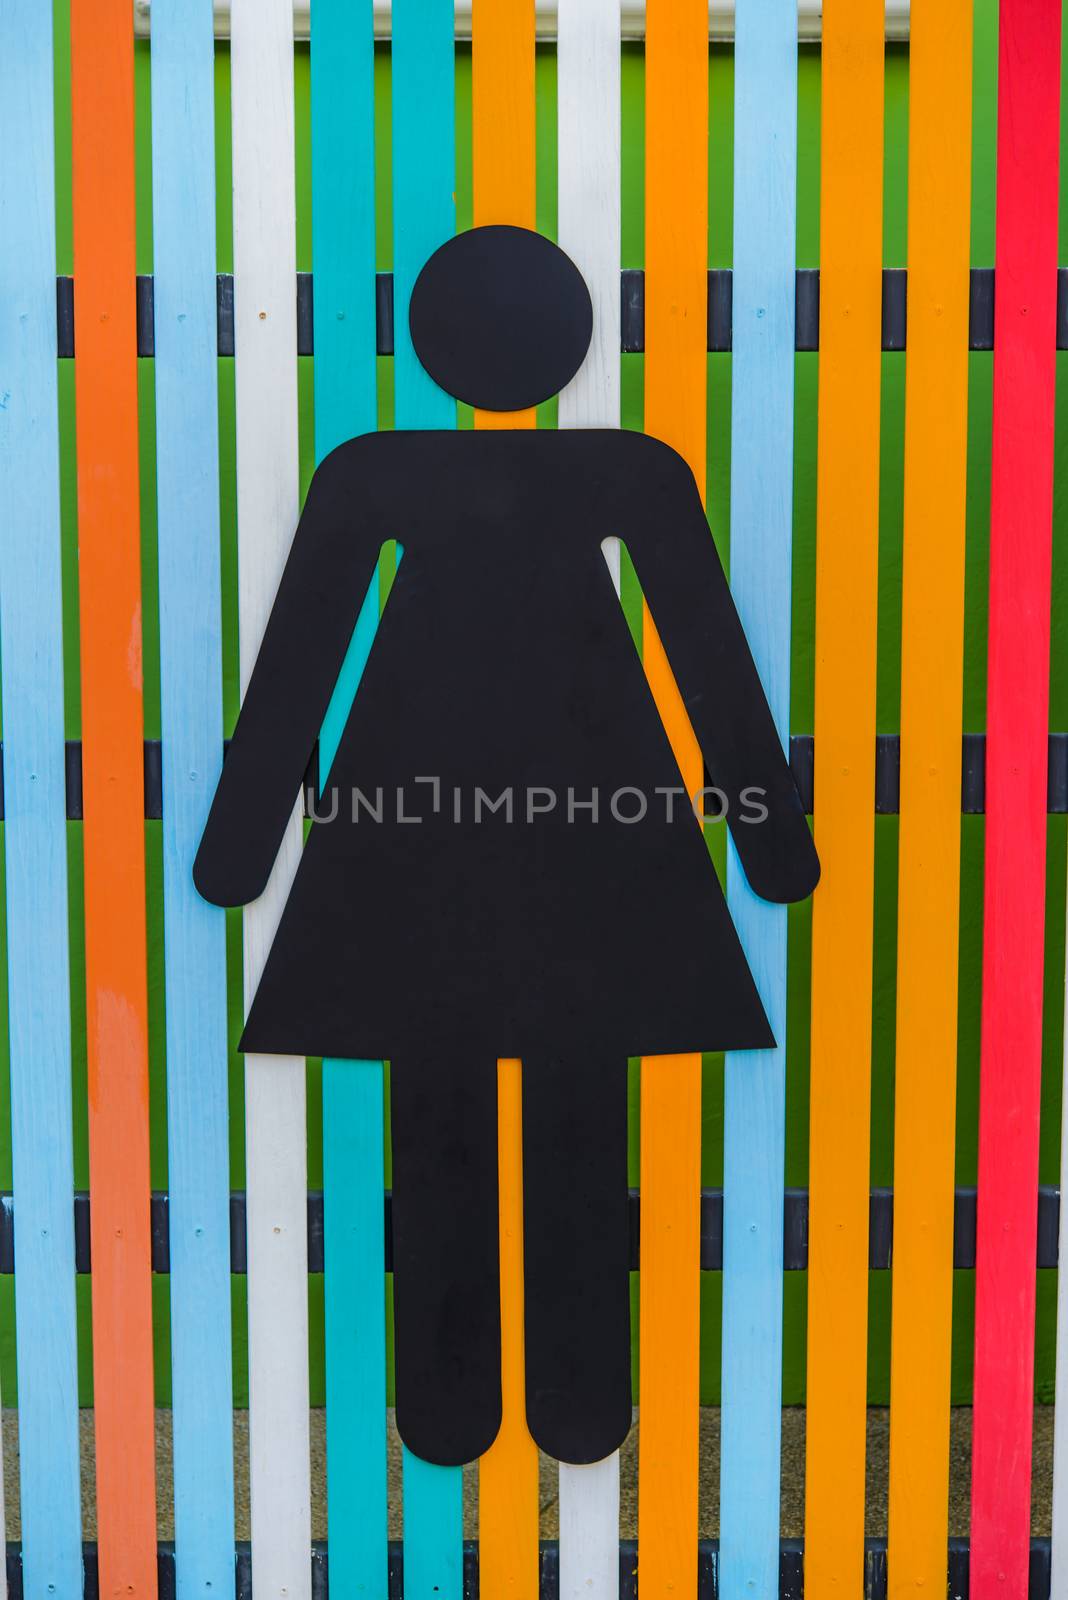 Women toilet signs on wooden plate colorful.